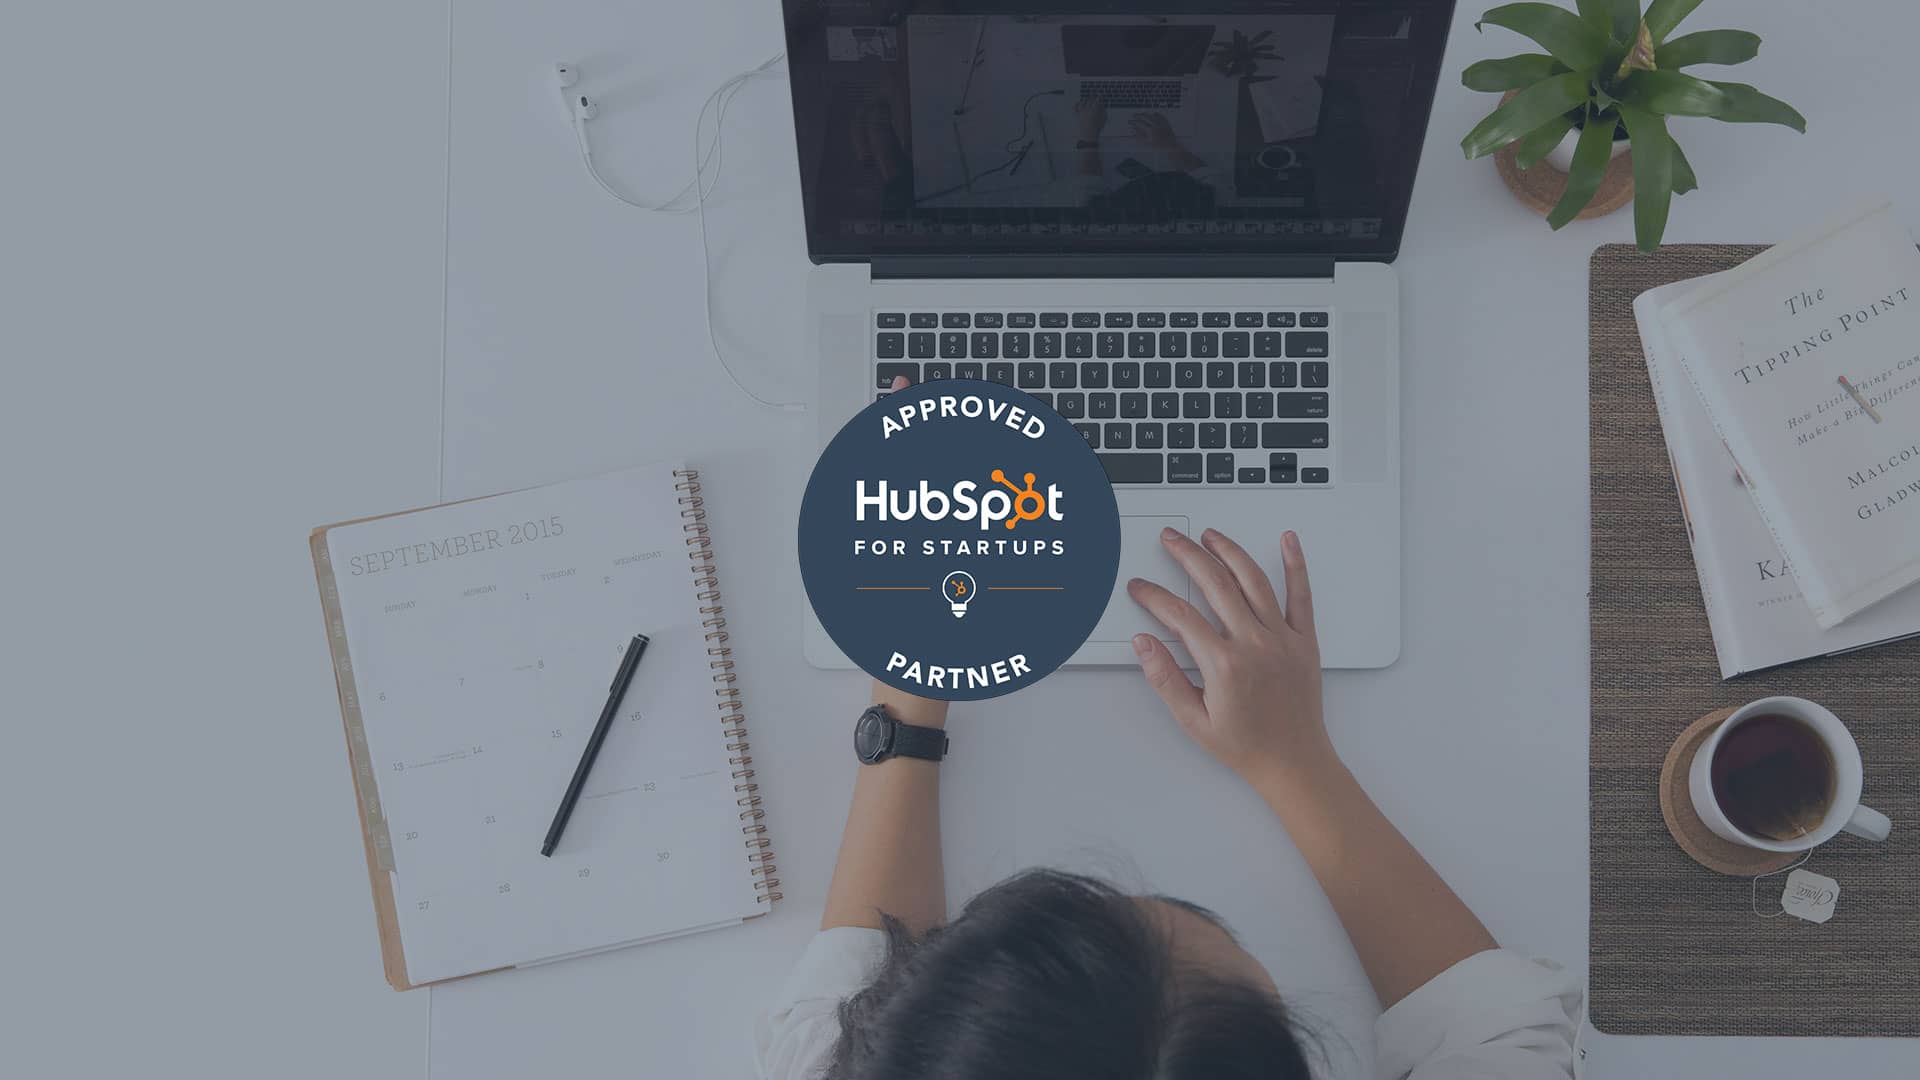 BonBillo partners with HubSpot for Startups